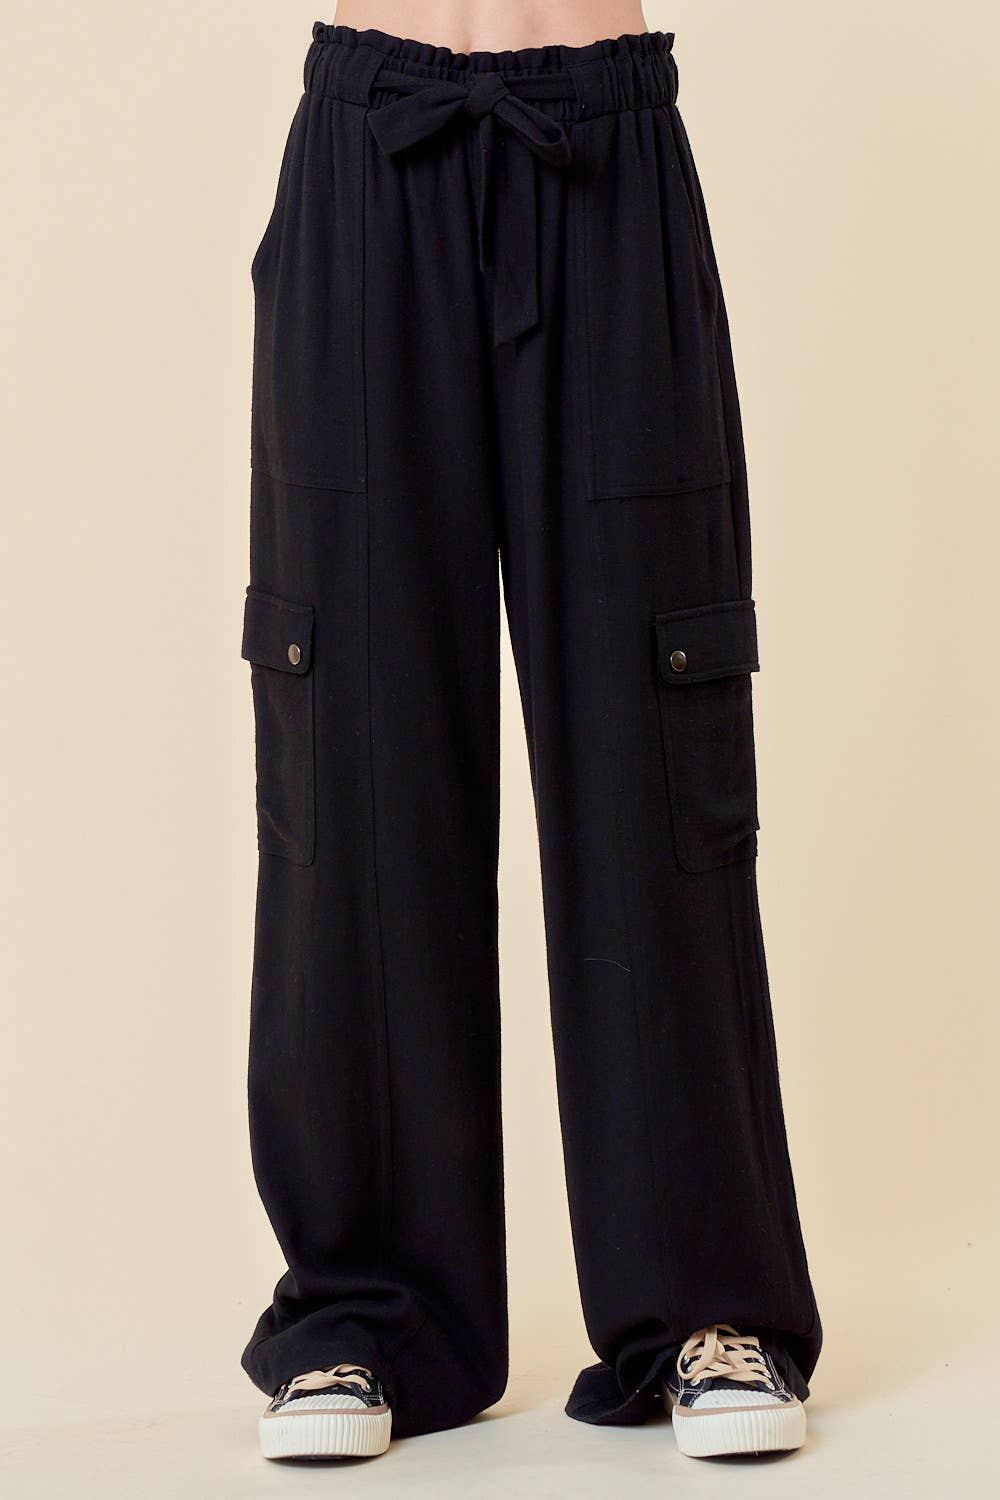 BLACK TIE FRONT PANTS WITH CARGO POCKETS